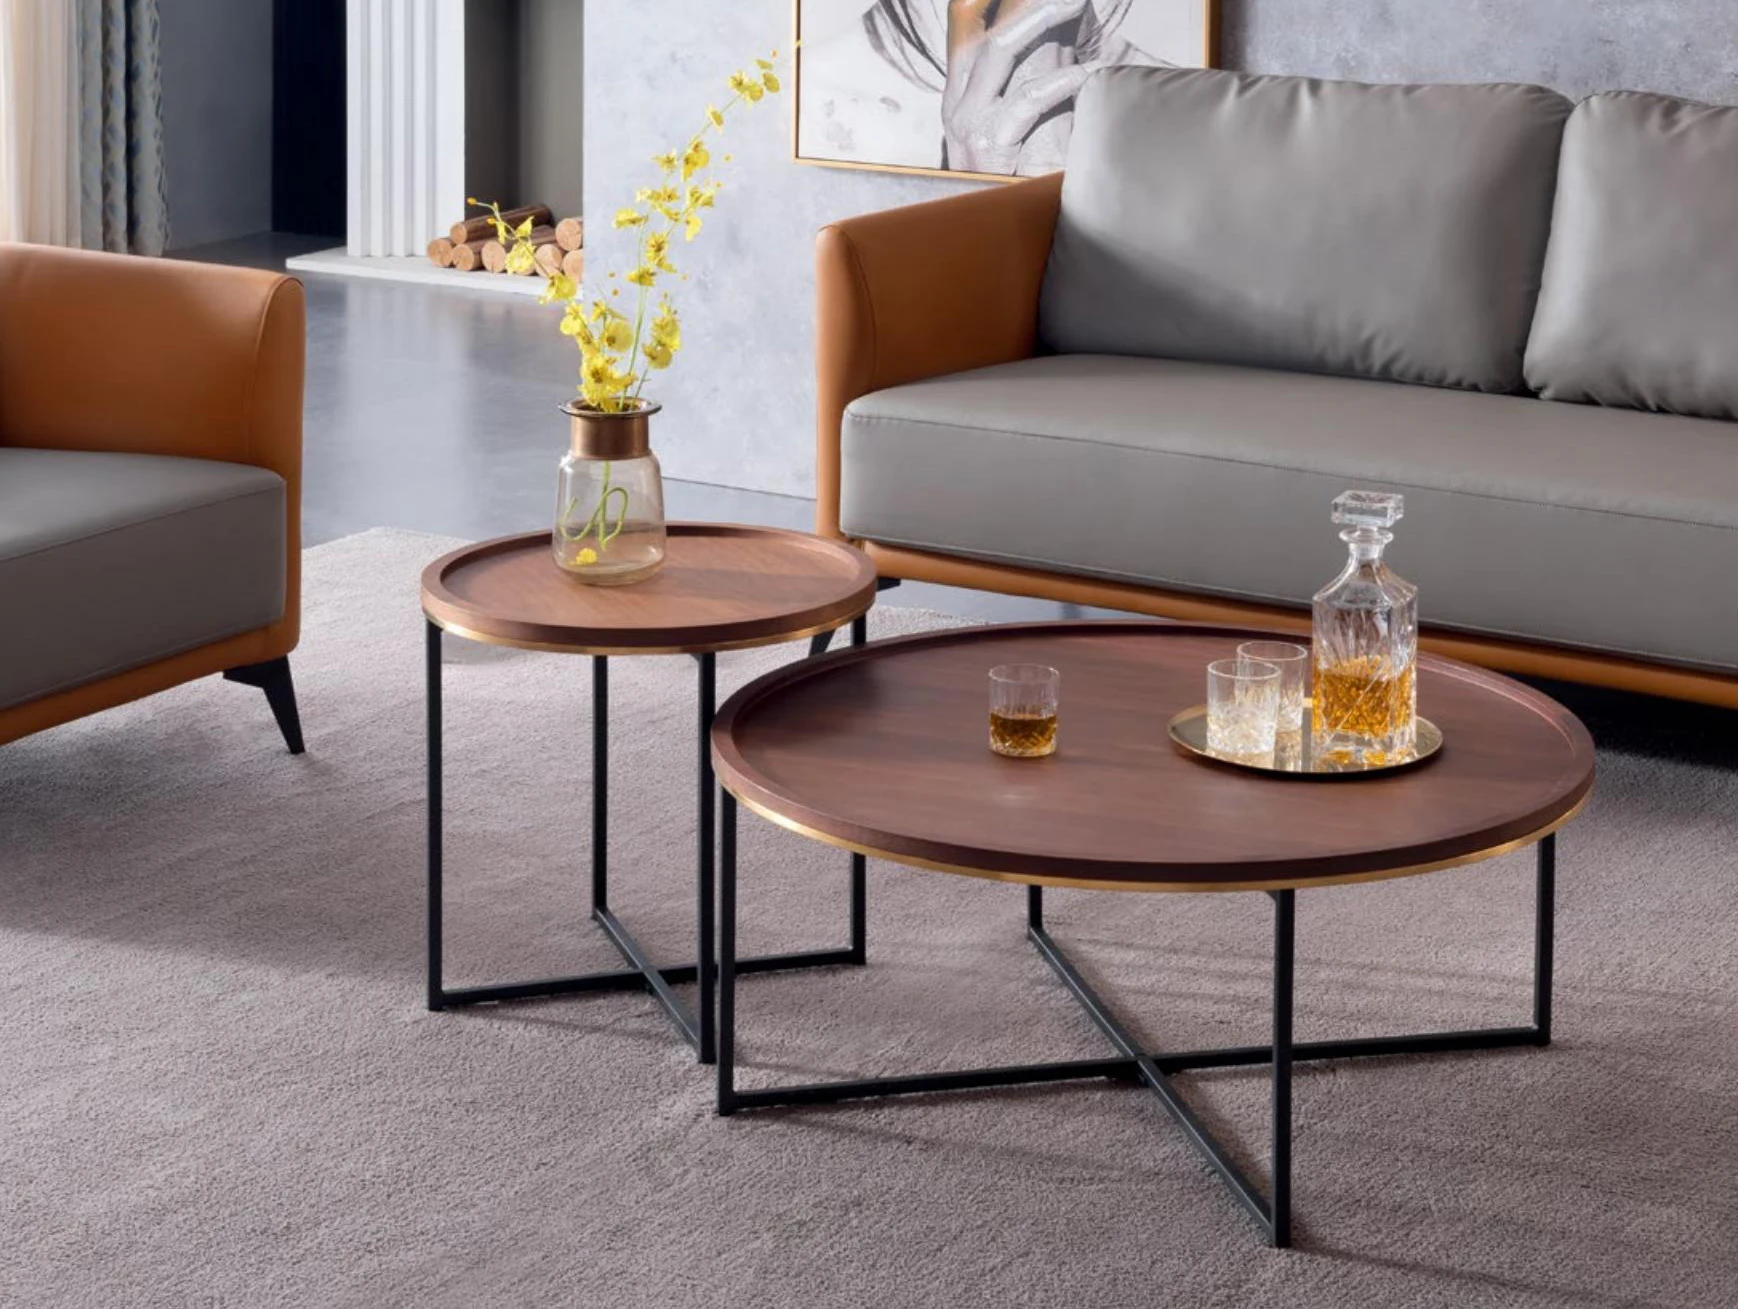 Contemporary Charm: Solid Wood Top Metal Legs Modern Coffee Tables for a Stylish Home